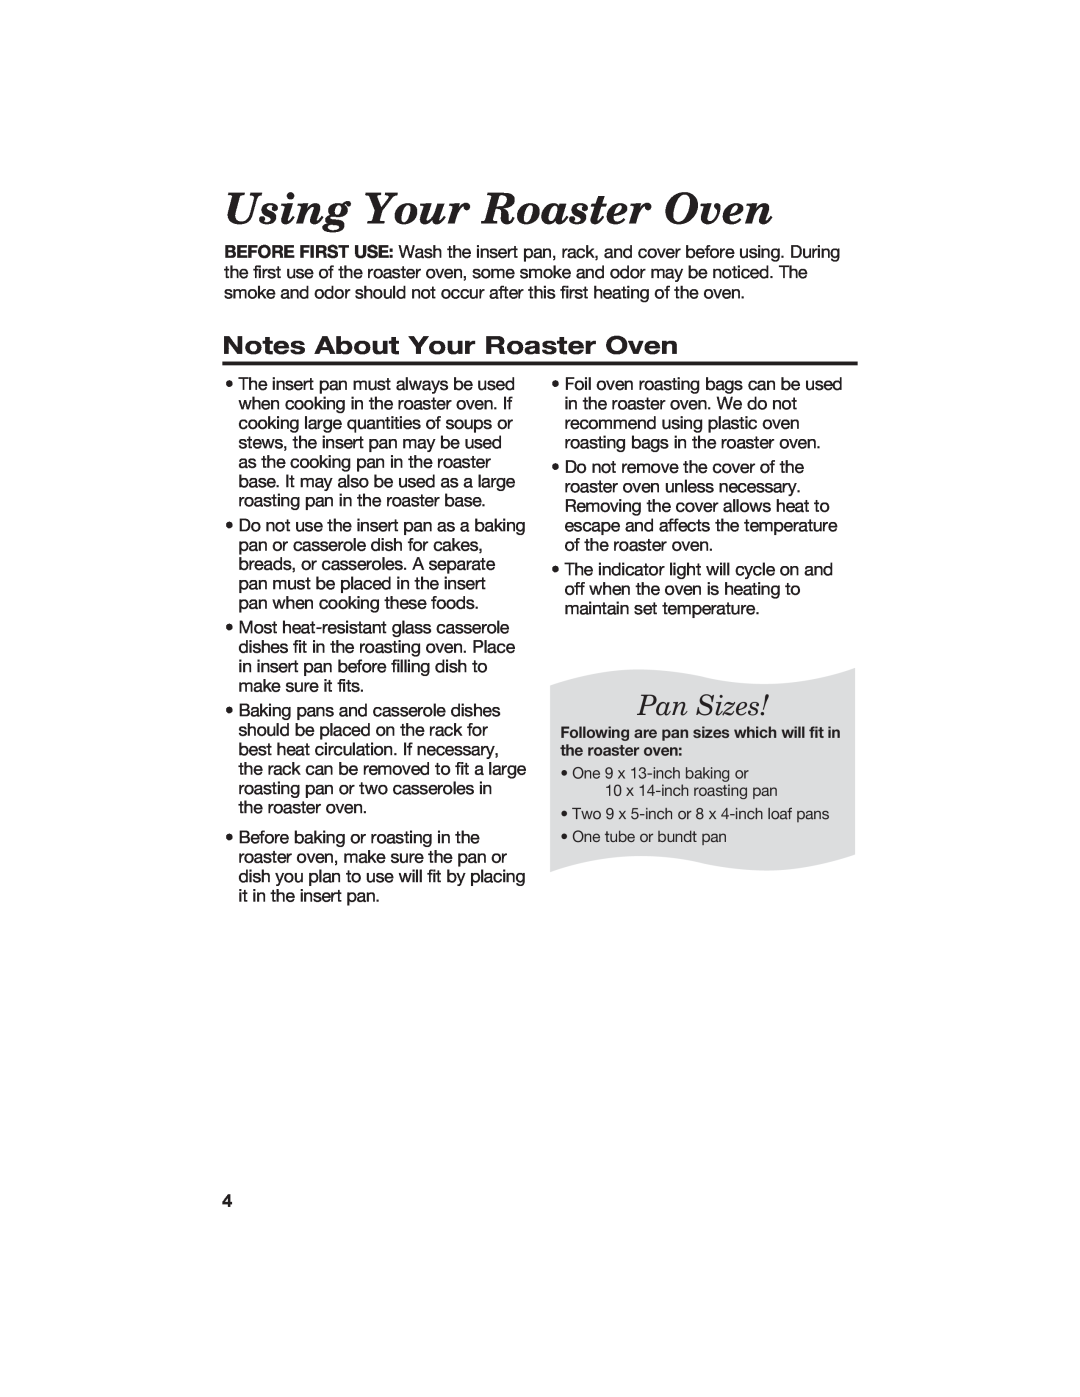 Hamilton Beach manual Using Your Roaster Oven, Pan Sizes, Notes About Your Roaster Oven 